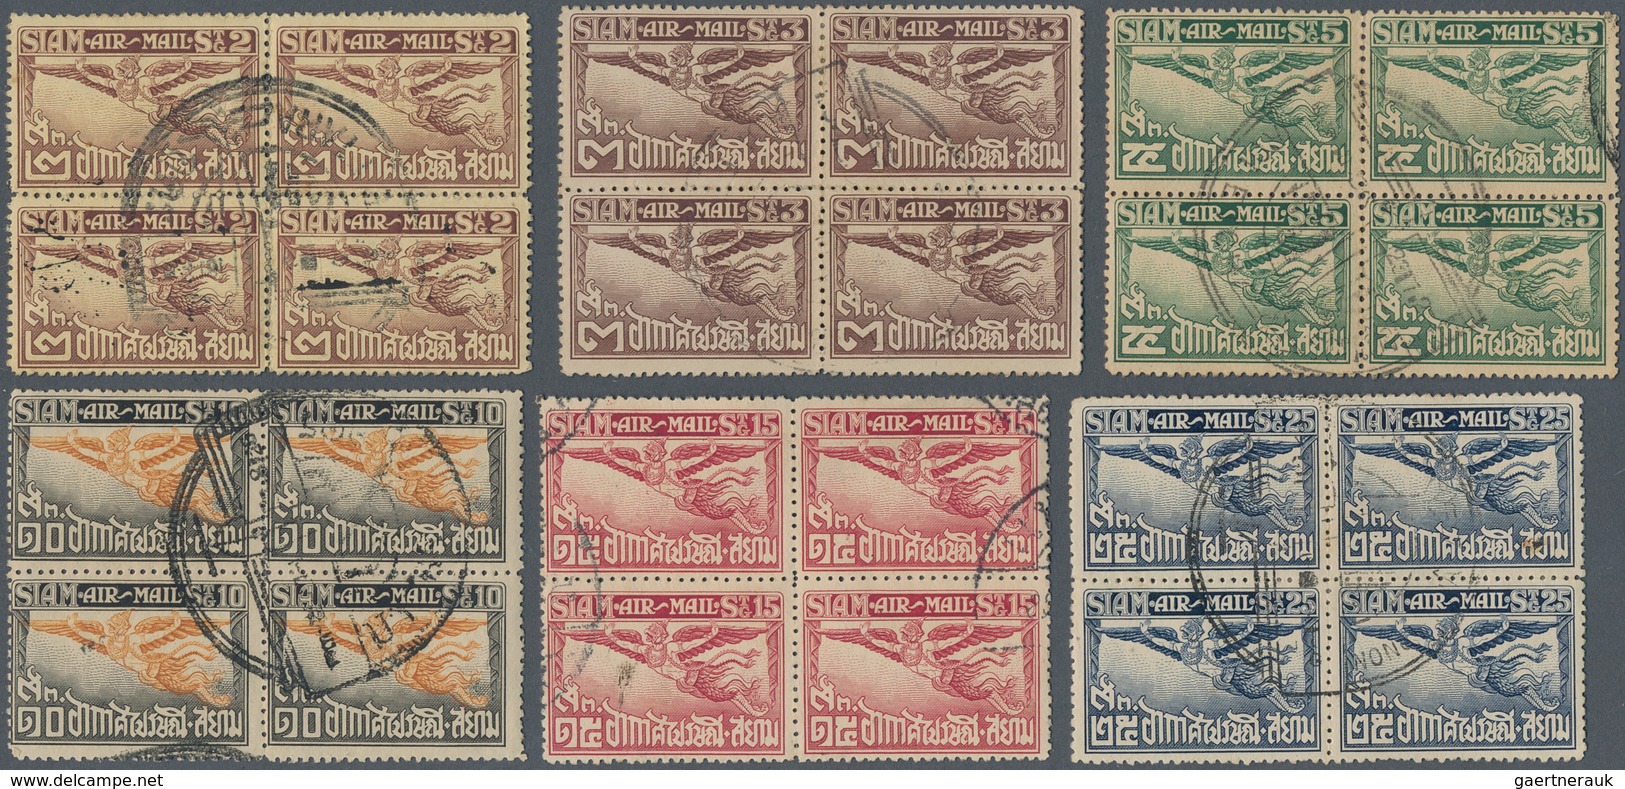 Thailand: 1925, Airmail Stamps 2 S To 1 B, Perforation 14 - 15 In Cancelled Blocks Of Four. - Tailandia